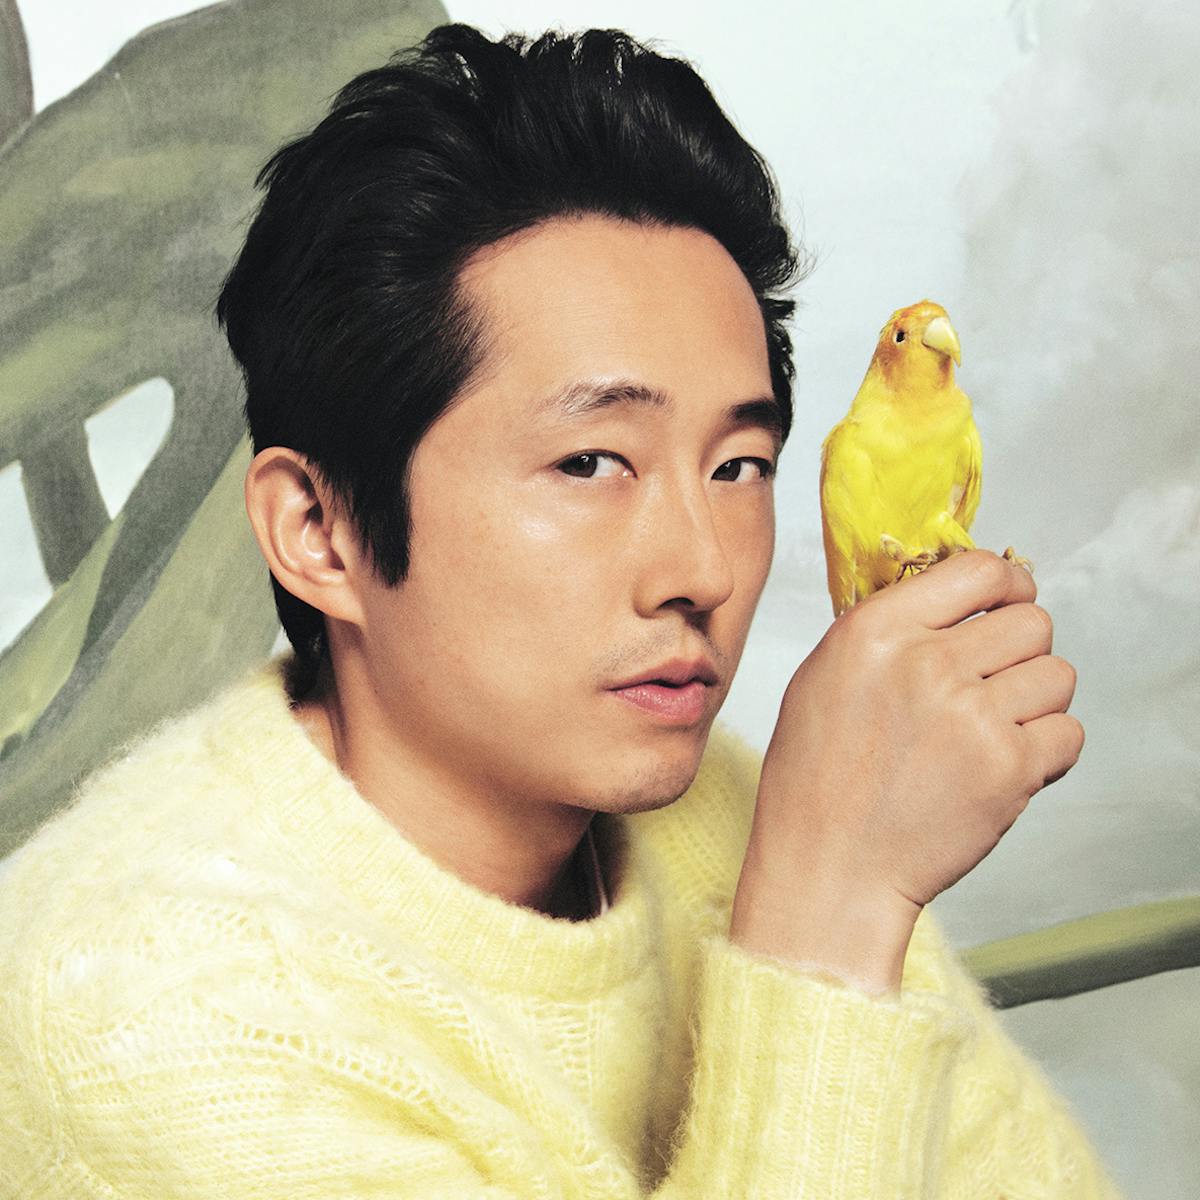 Steven Yeun wears a yellow sweater and black pants. A little yellow bird is perched on his hand. Behind him are some painted flowers on the wall. 